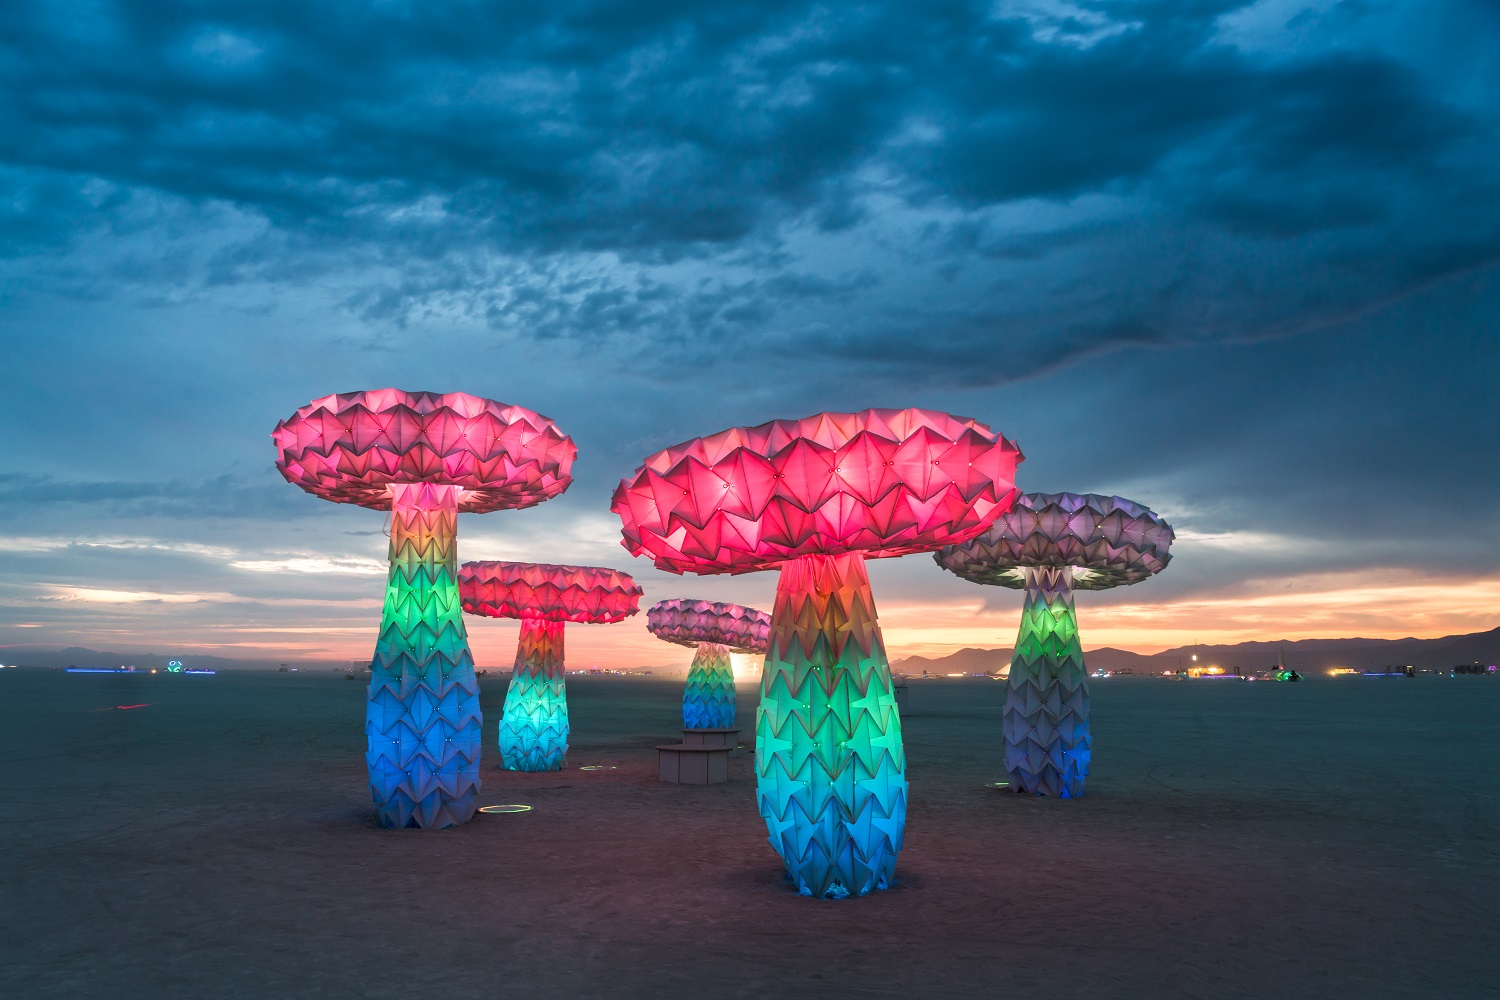 Pink, green, and blue lighted mushrooms against a dark, cloudy sky in a flat desert landscape.